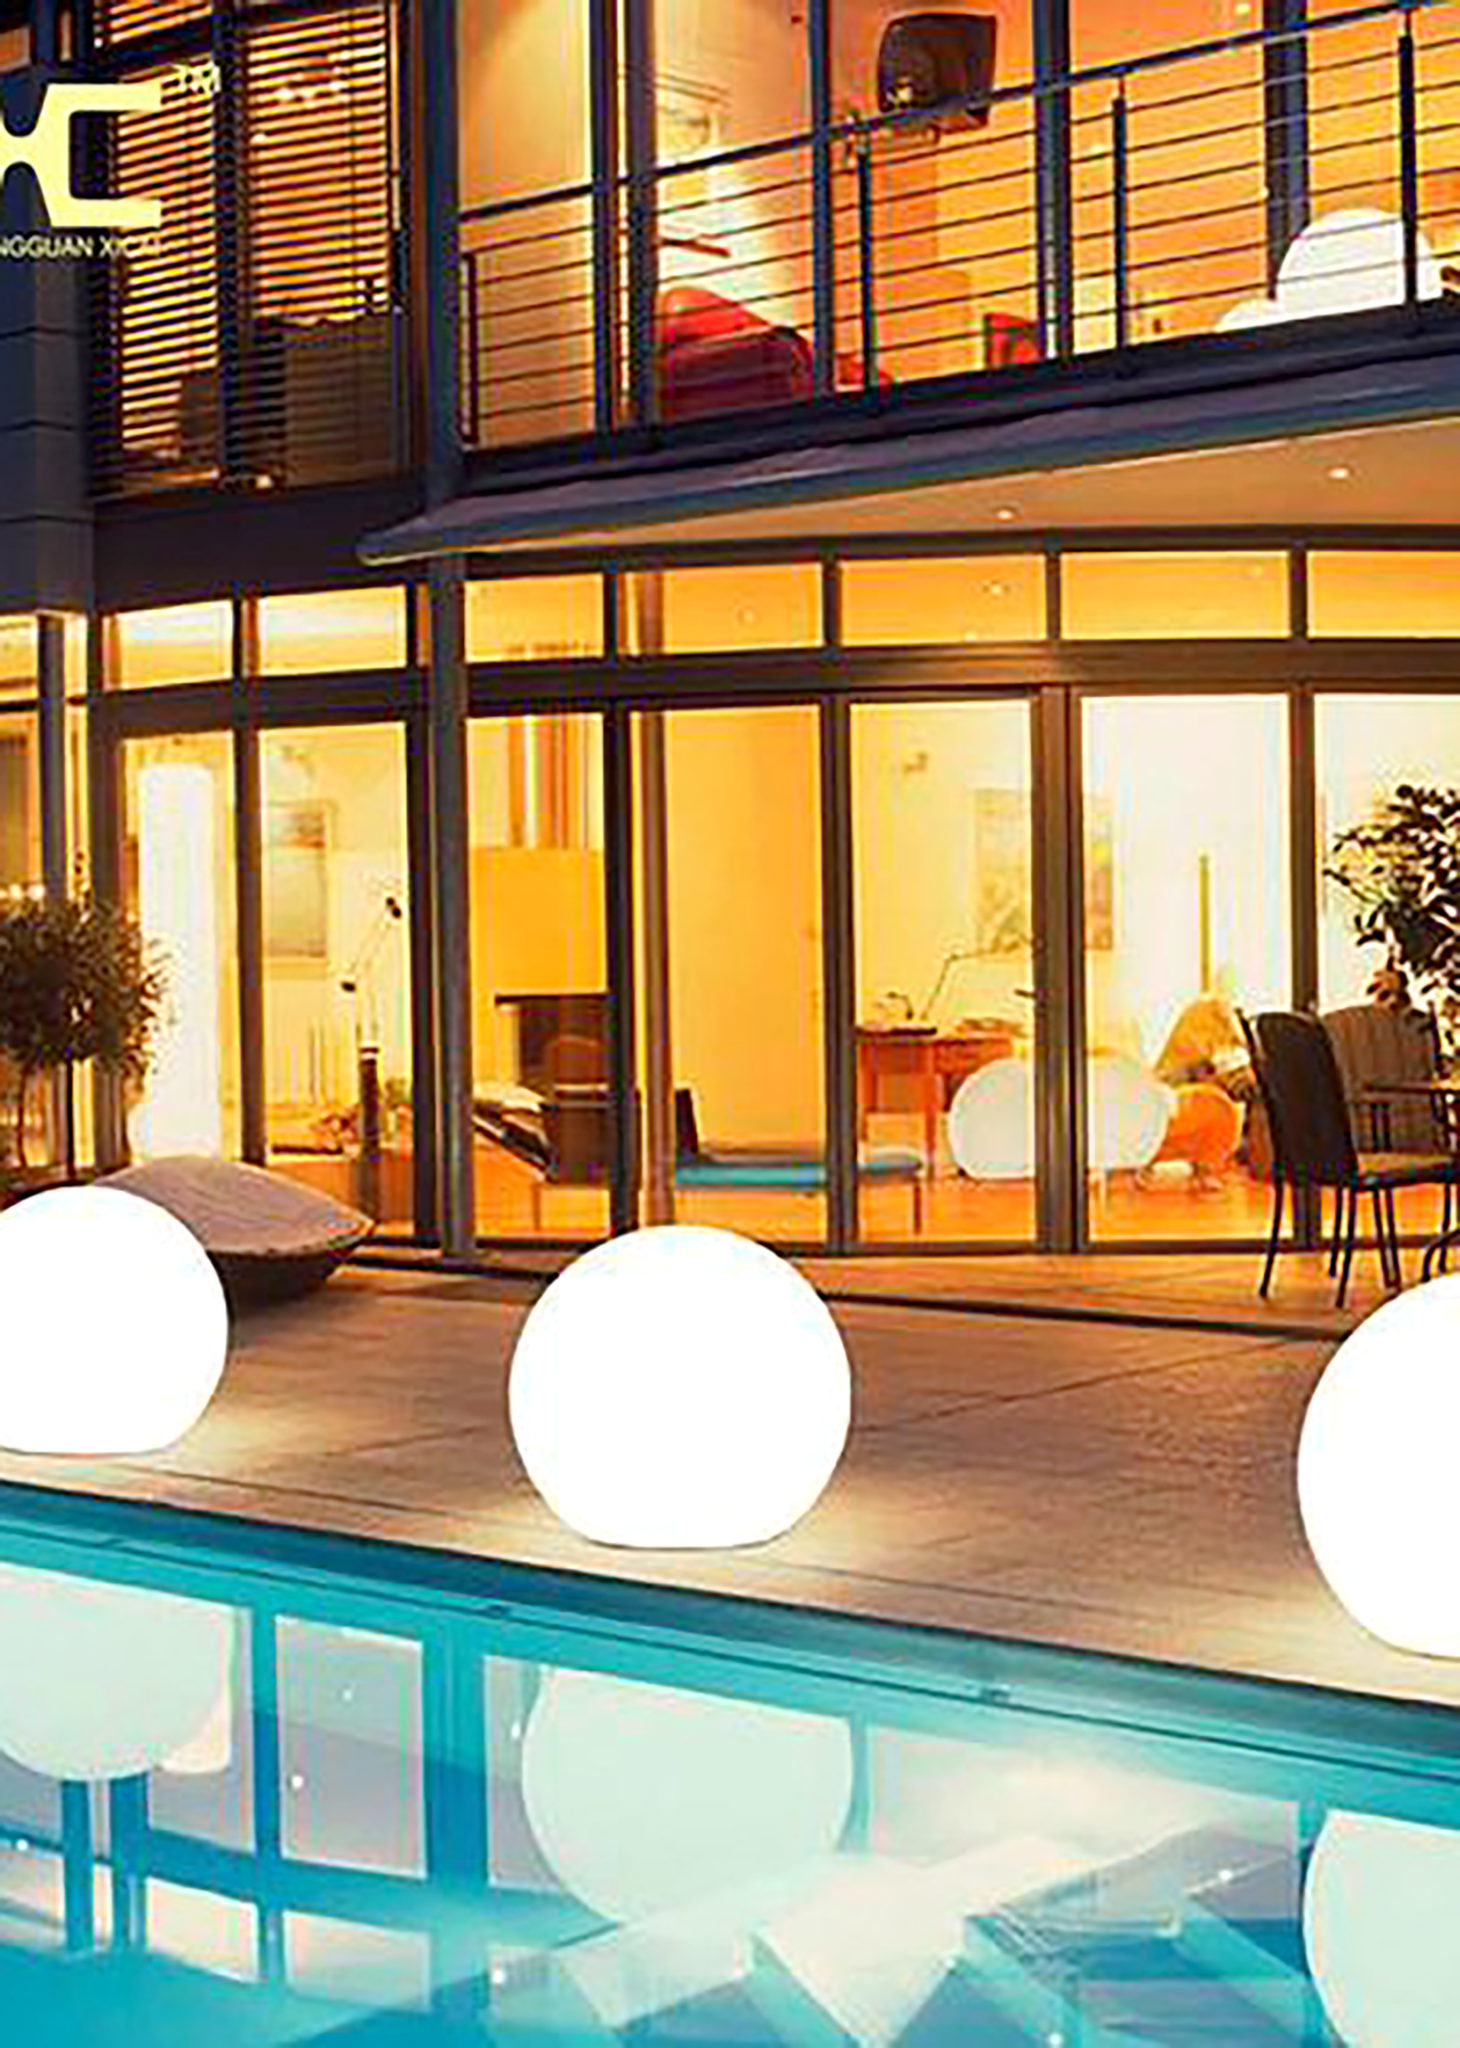 Large orb lights by a pool